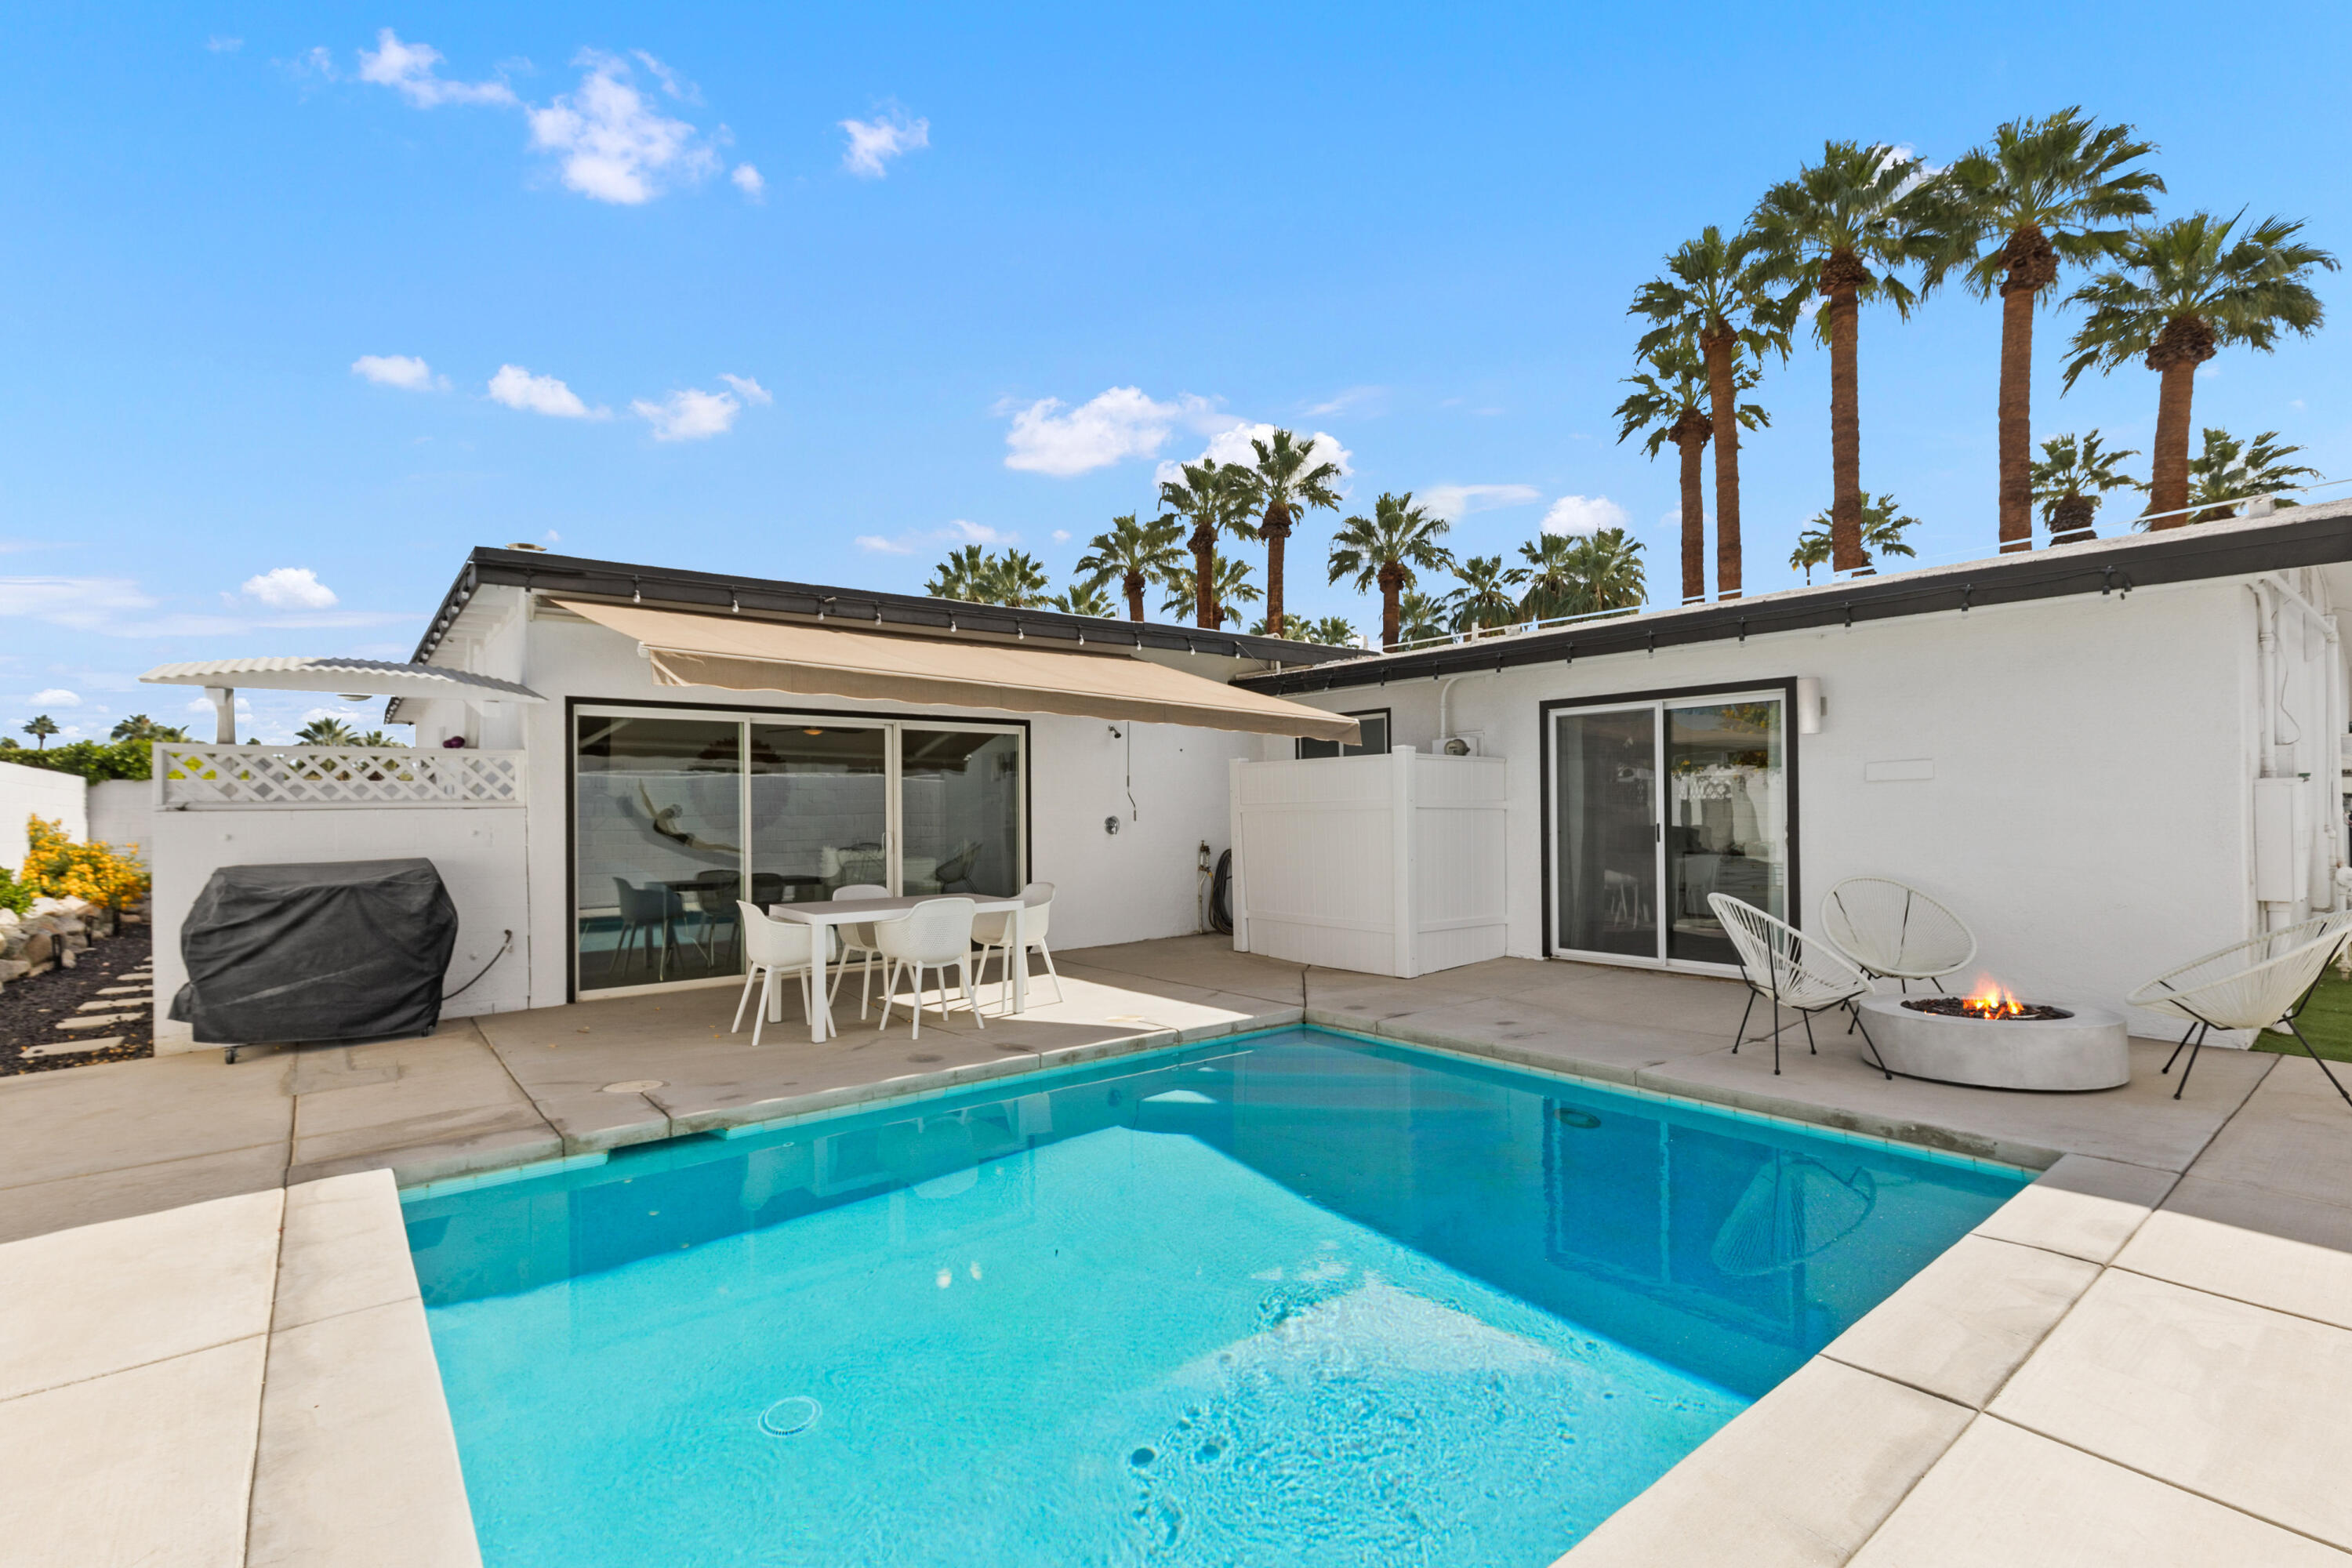 70050 Chappel Road, Rancho Mirage, California, 92270, United States, 3 Bedrooms Bedrooms, ,3 BathroomsBathrooms,Residential,For Sale,70050 Chappel Road,1498675